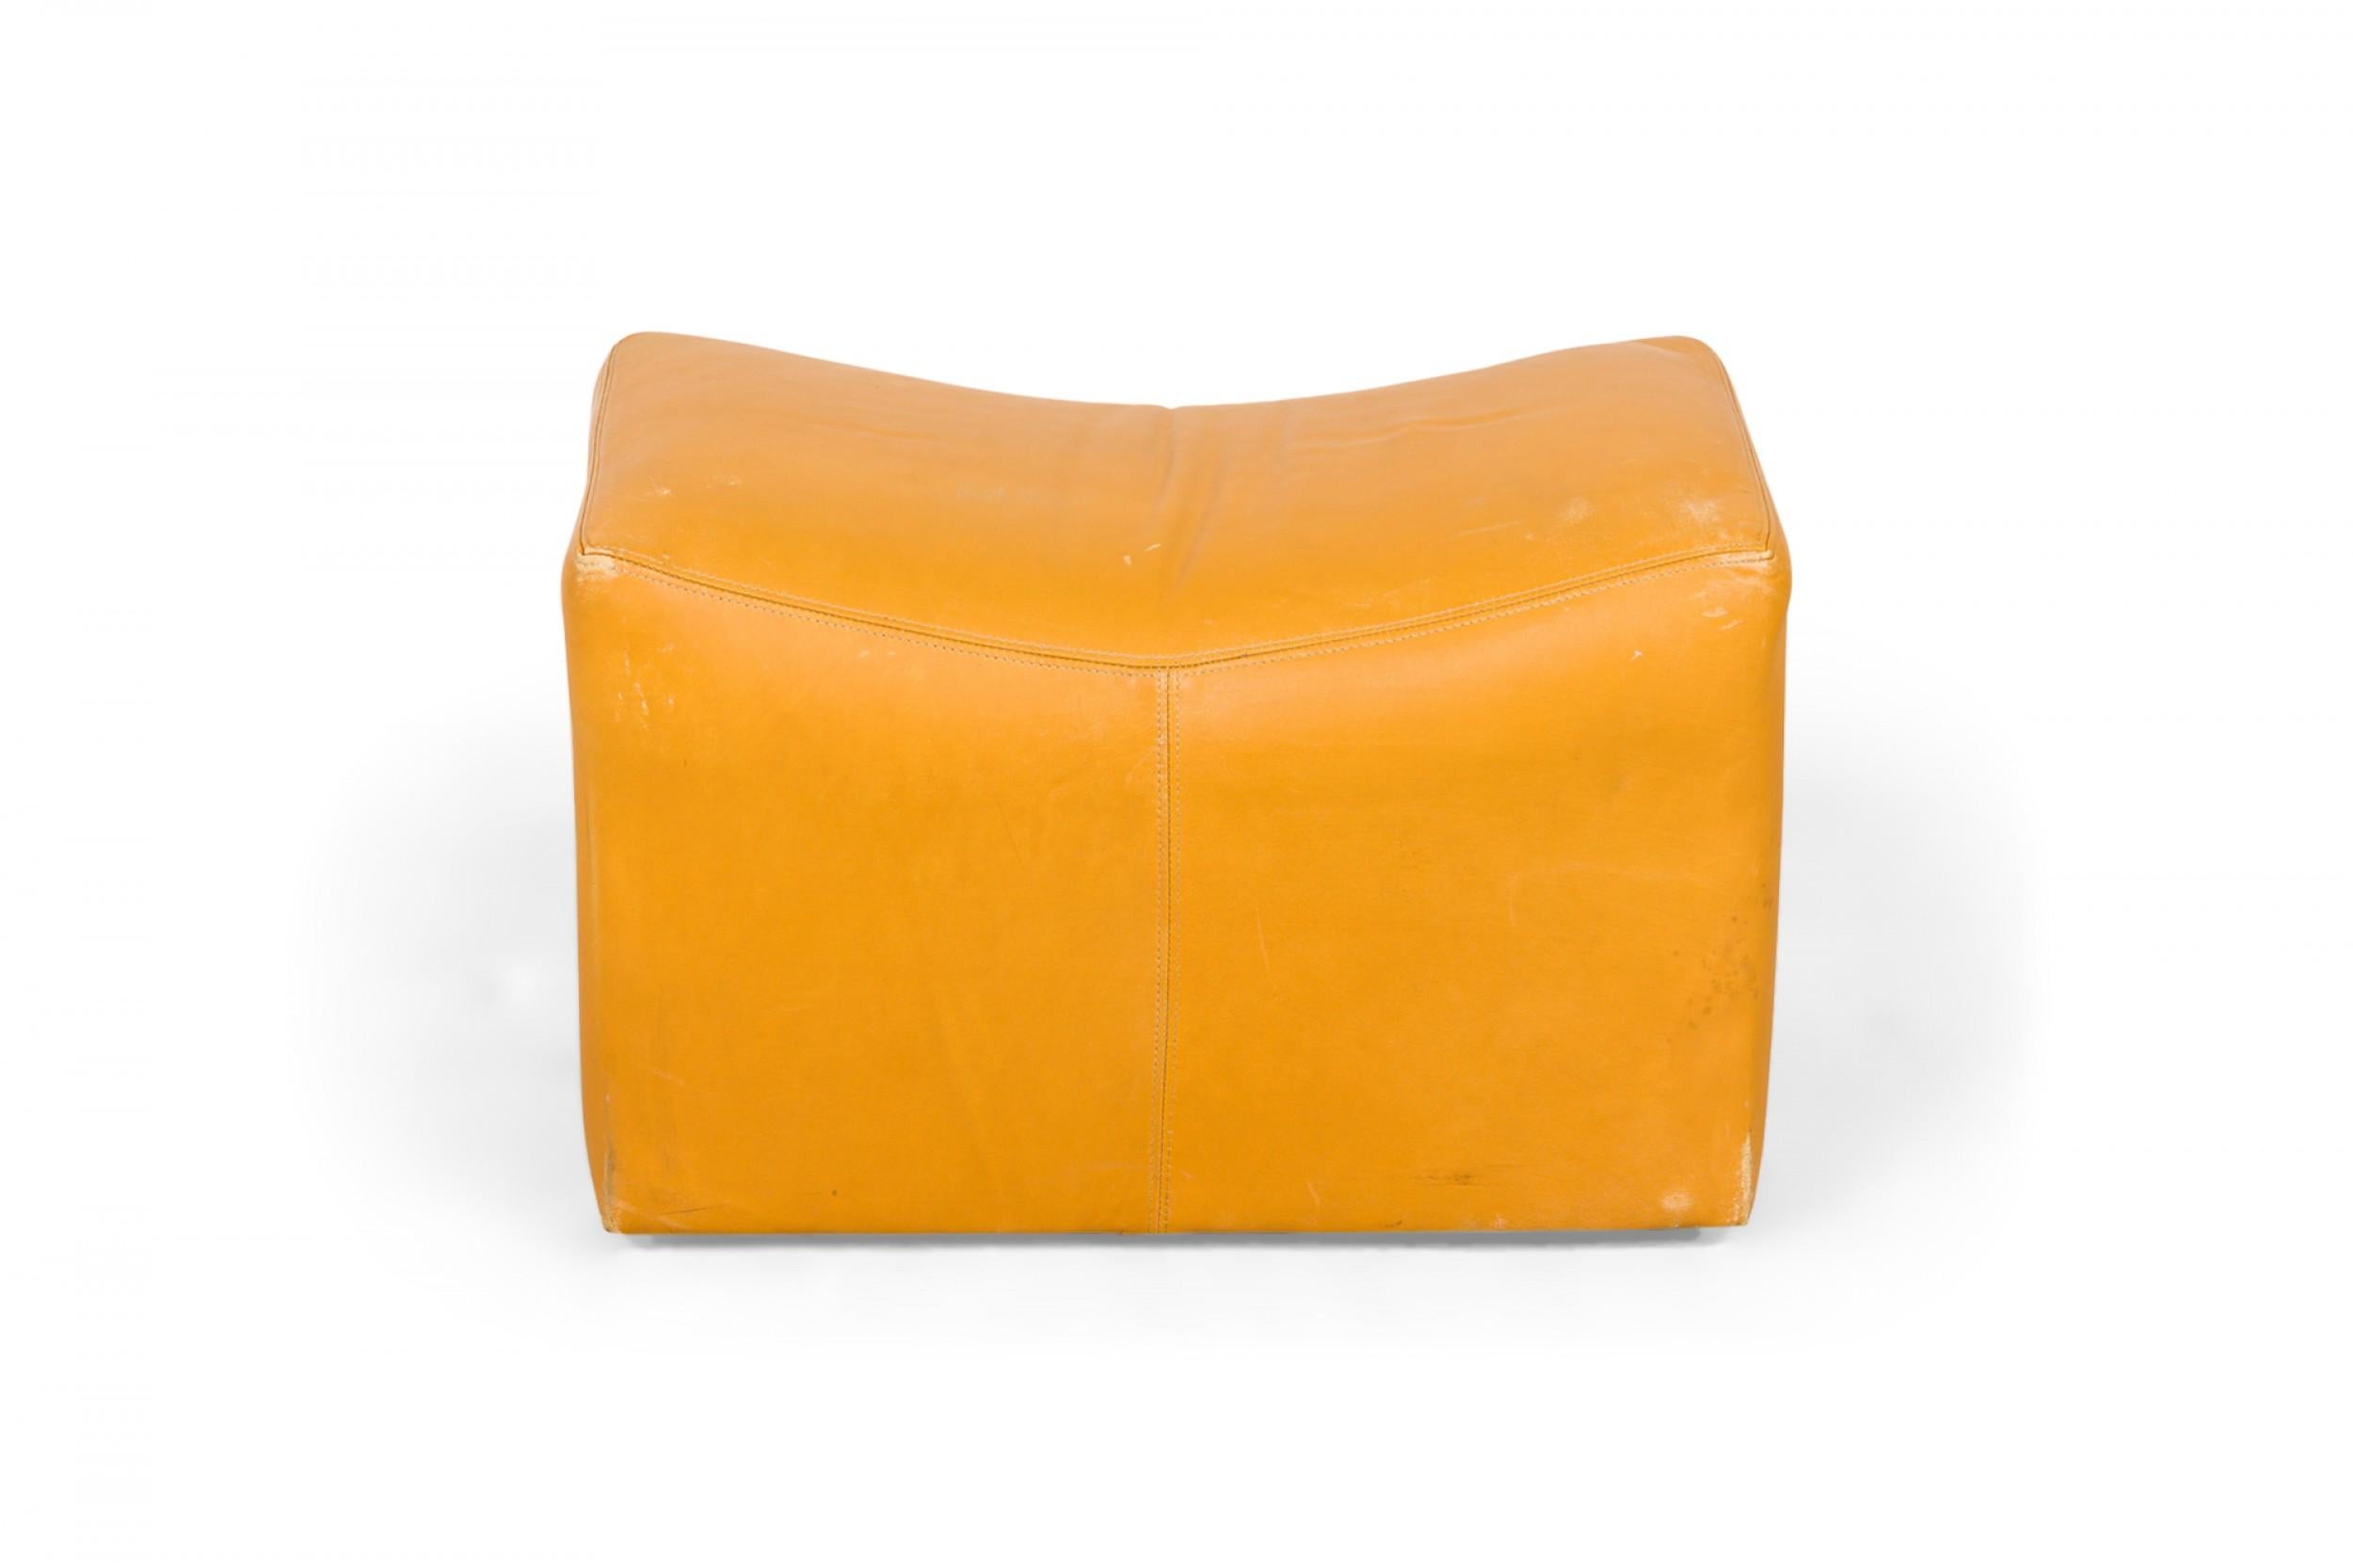 PAIR of American Mid-Century rectangular saddle form ottomans with mustard yellow leather upholstery and scooped tops, resting on four concealed casters. (MILO BAUGHMAN)(PRICED AS PAIR)